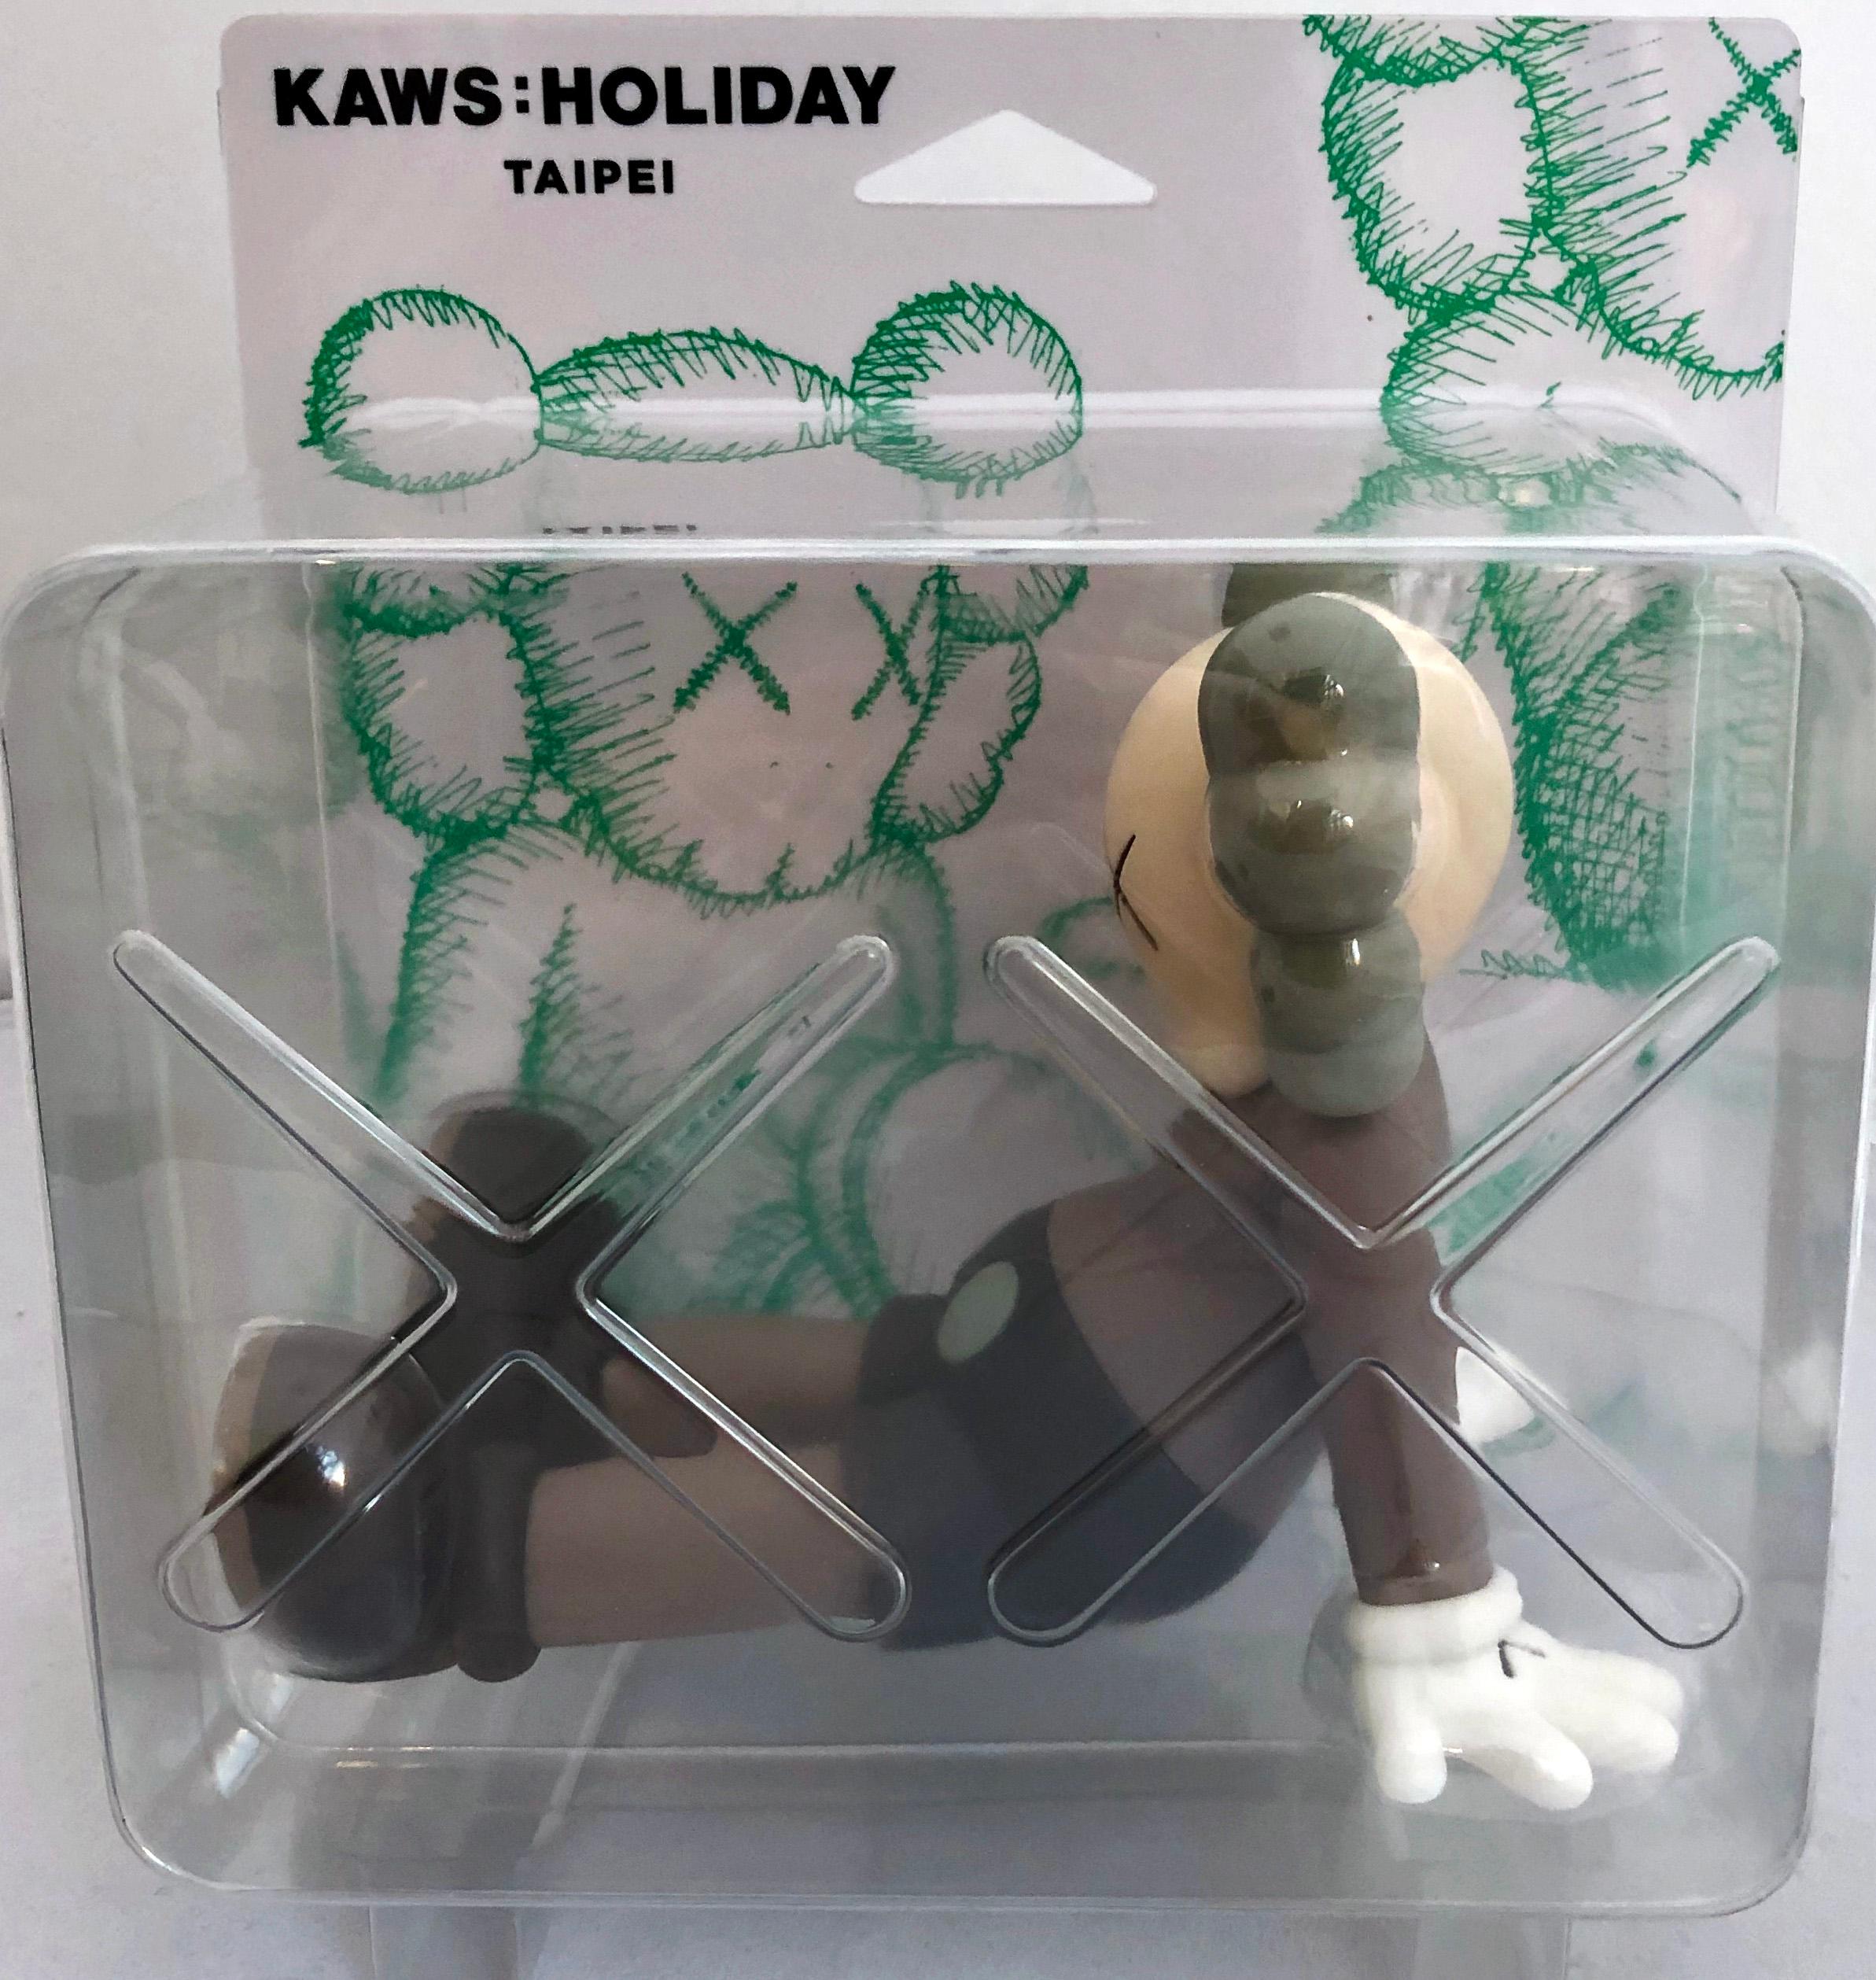 KAWS Taipei Holiday Companion, Set of 2 (KAWS Brown & Grey Companion): 
KAWS' signature character COMPANION presented in a resting seated position. 2 individual pieces (brown, & grey). Each published by All Rights Reserved to commemorate the debut